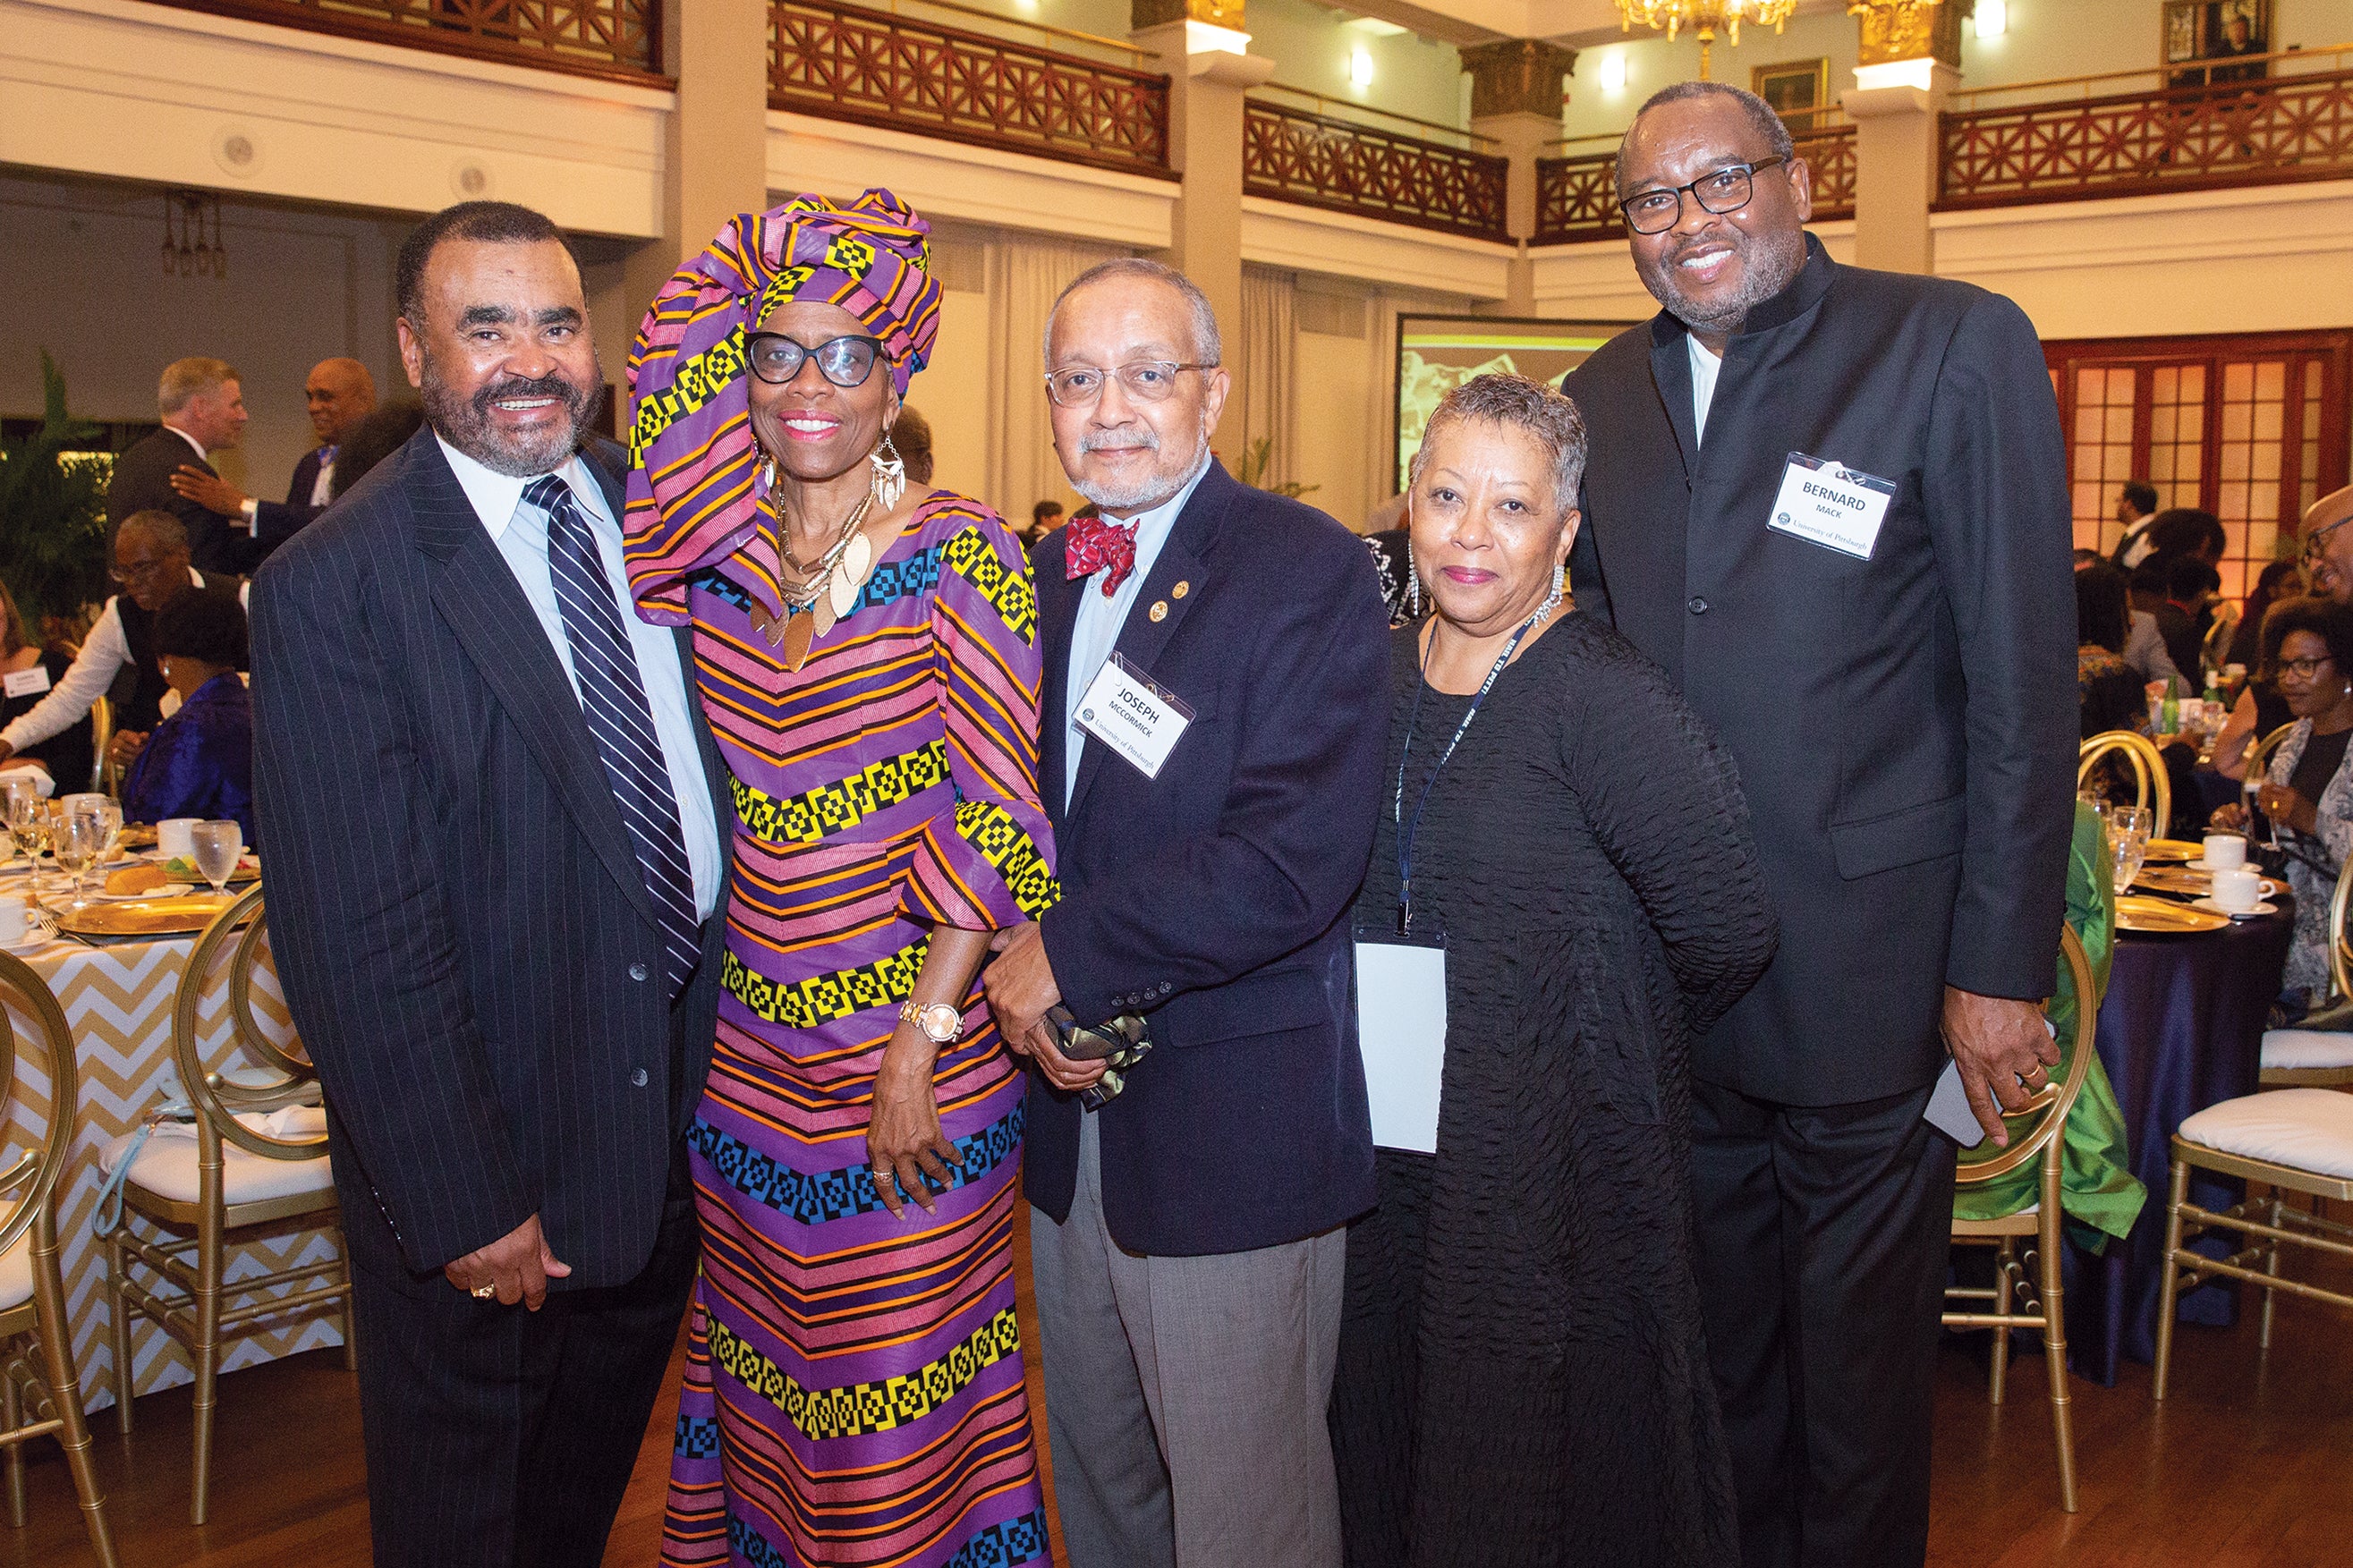 Homecoming weekend featured the Pitt African American Alumni Council Sankofa Awards Banquet. Pictured left to right: Trustee Douglas Browning (A&S ’72), Valerie Njie (EDUC ’71), Joseph McCormick (A&S ’69, ’73G, ’79G), Marlene C. Mahoney (A&S ’71), and Bernard Mack (A&S ’88).